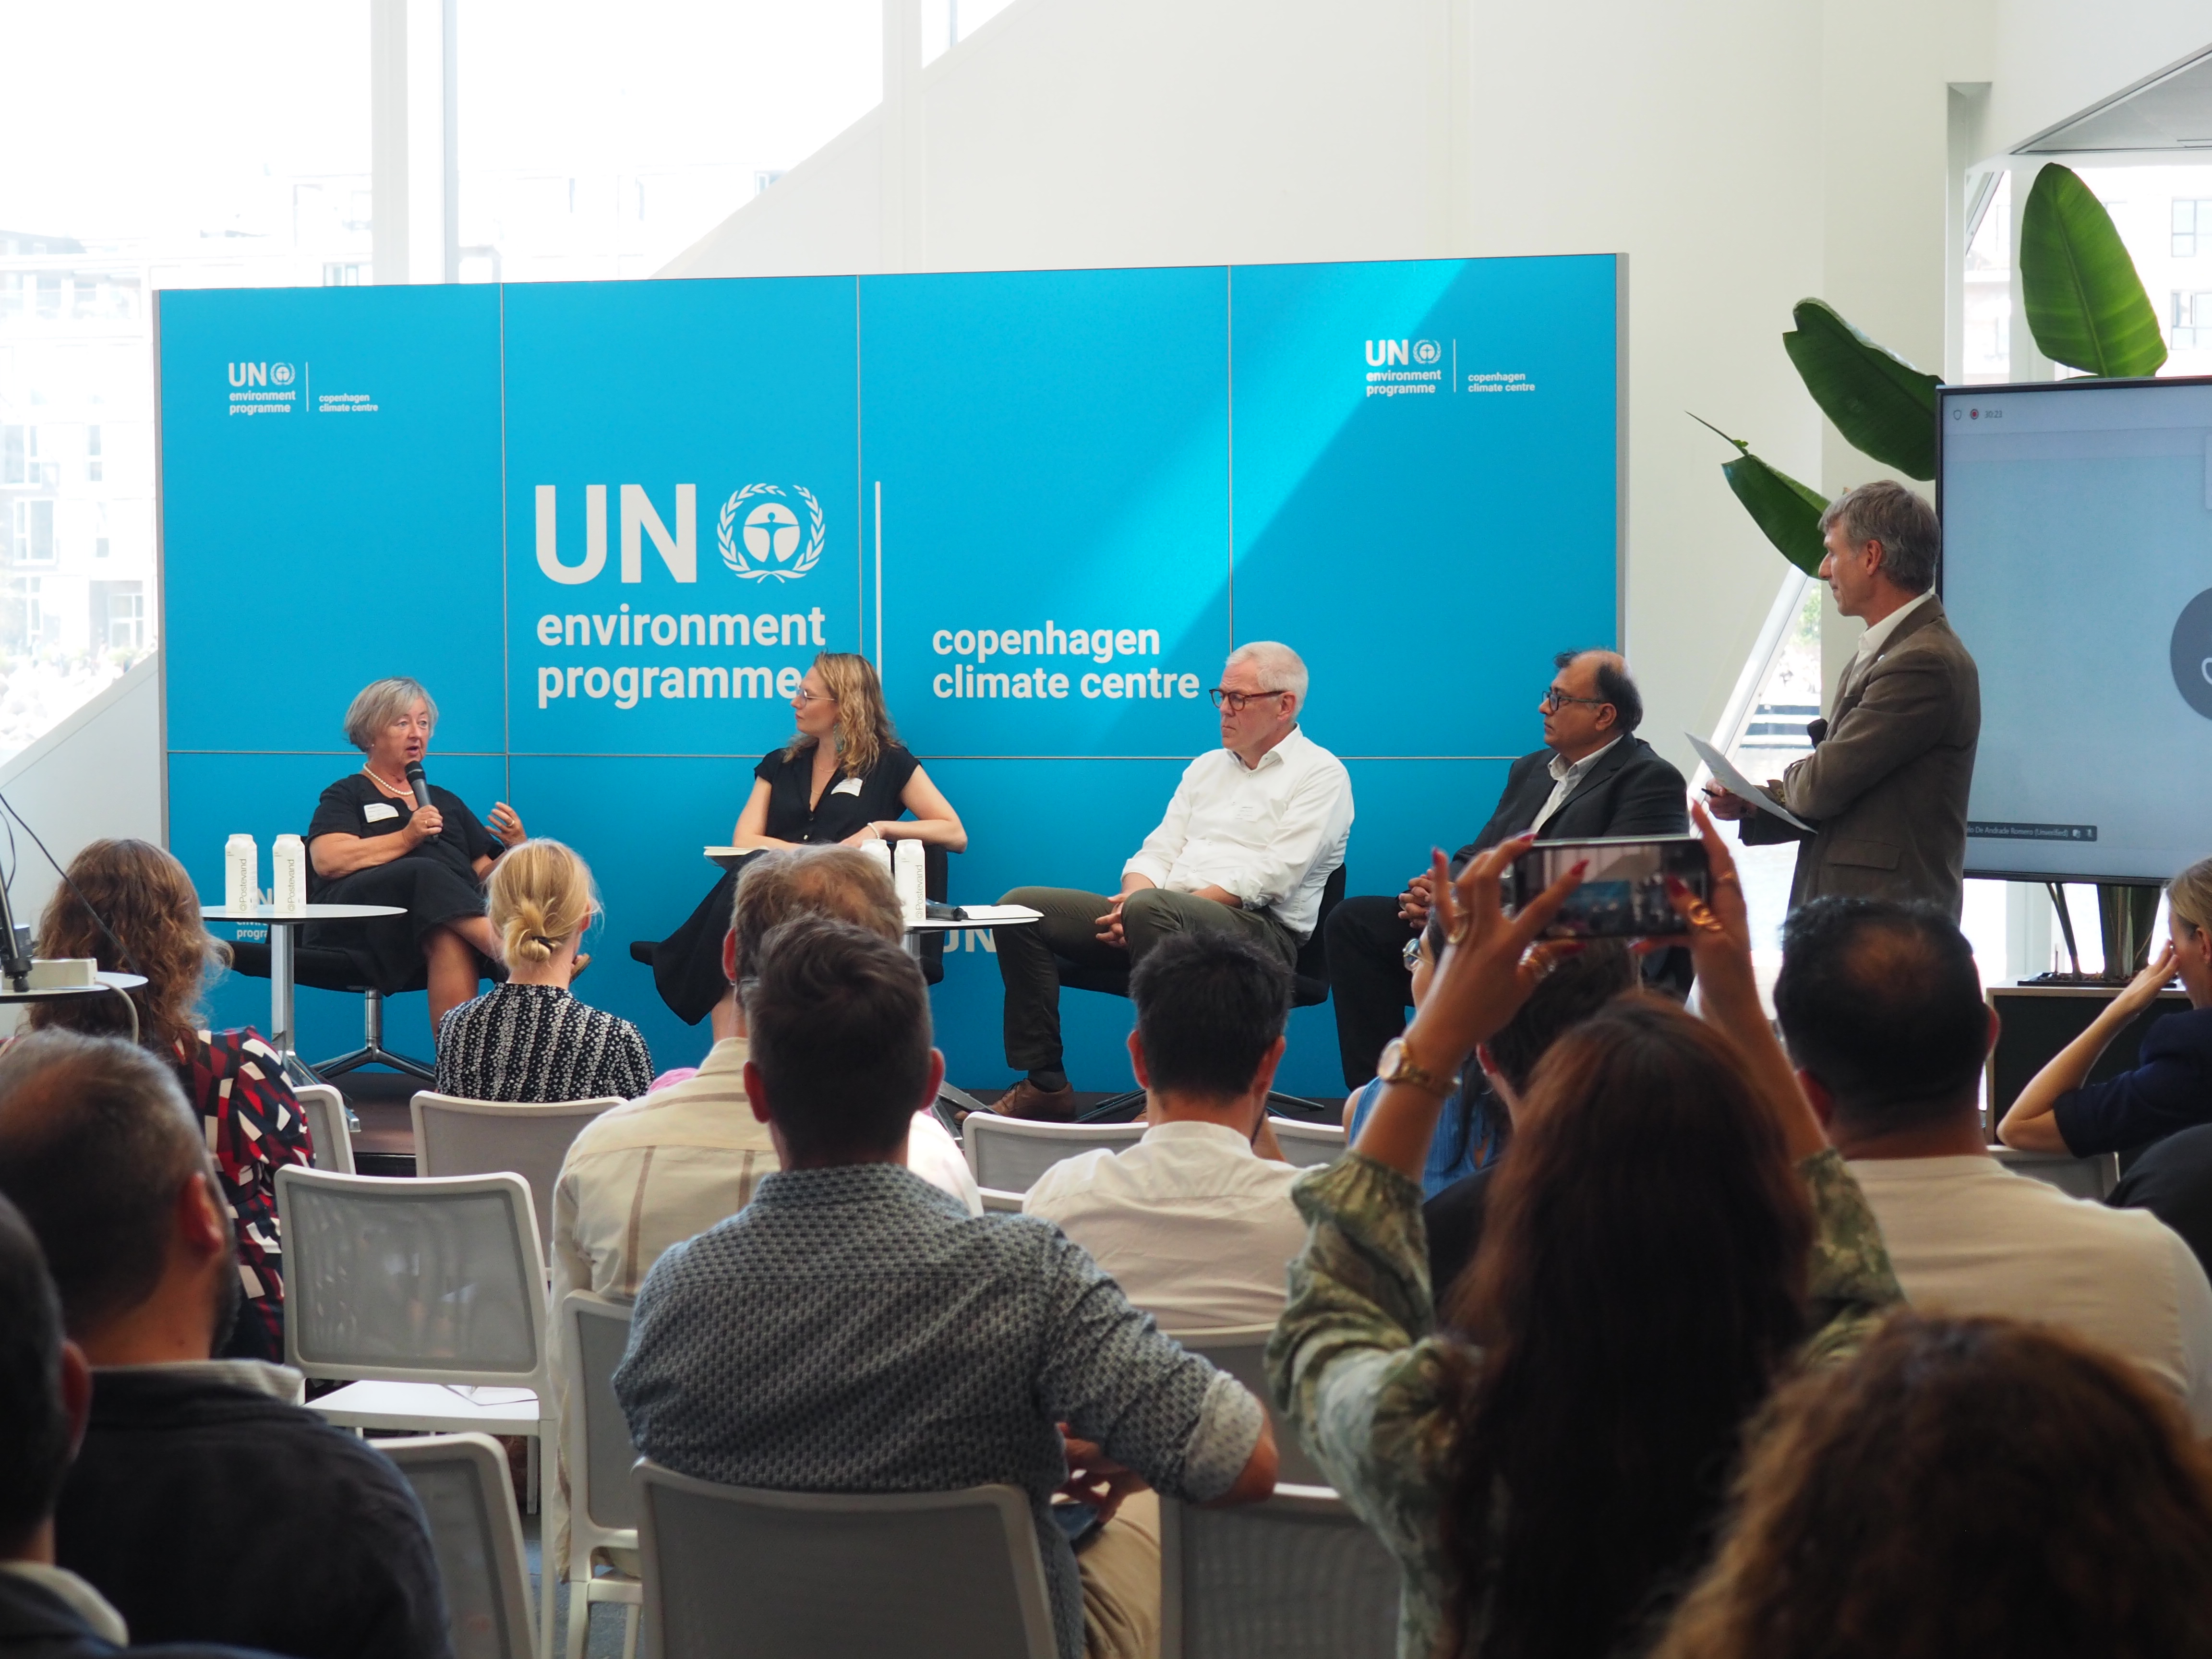 nature-based solutions event in UN City